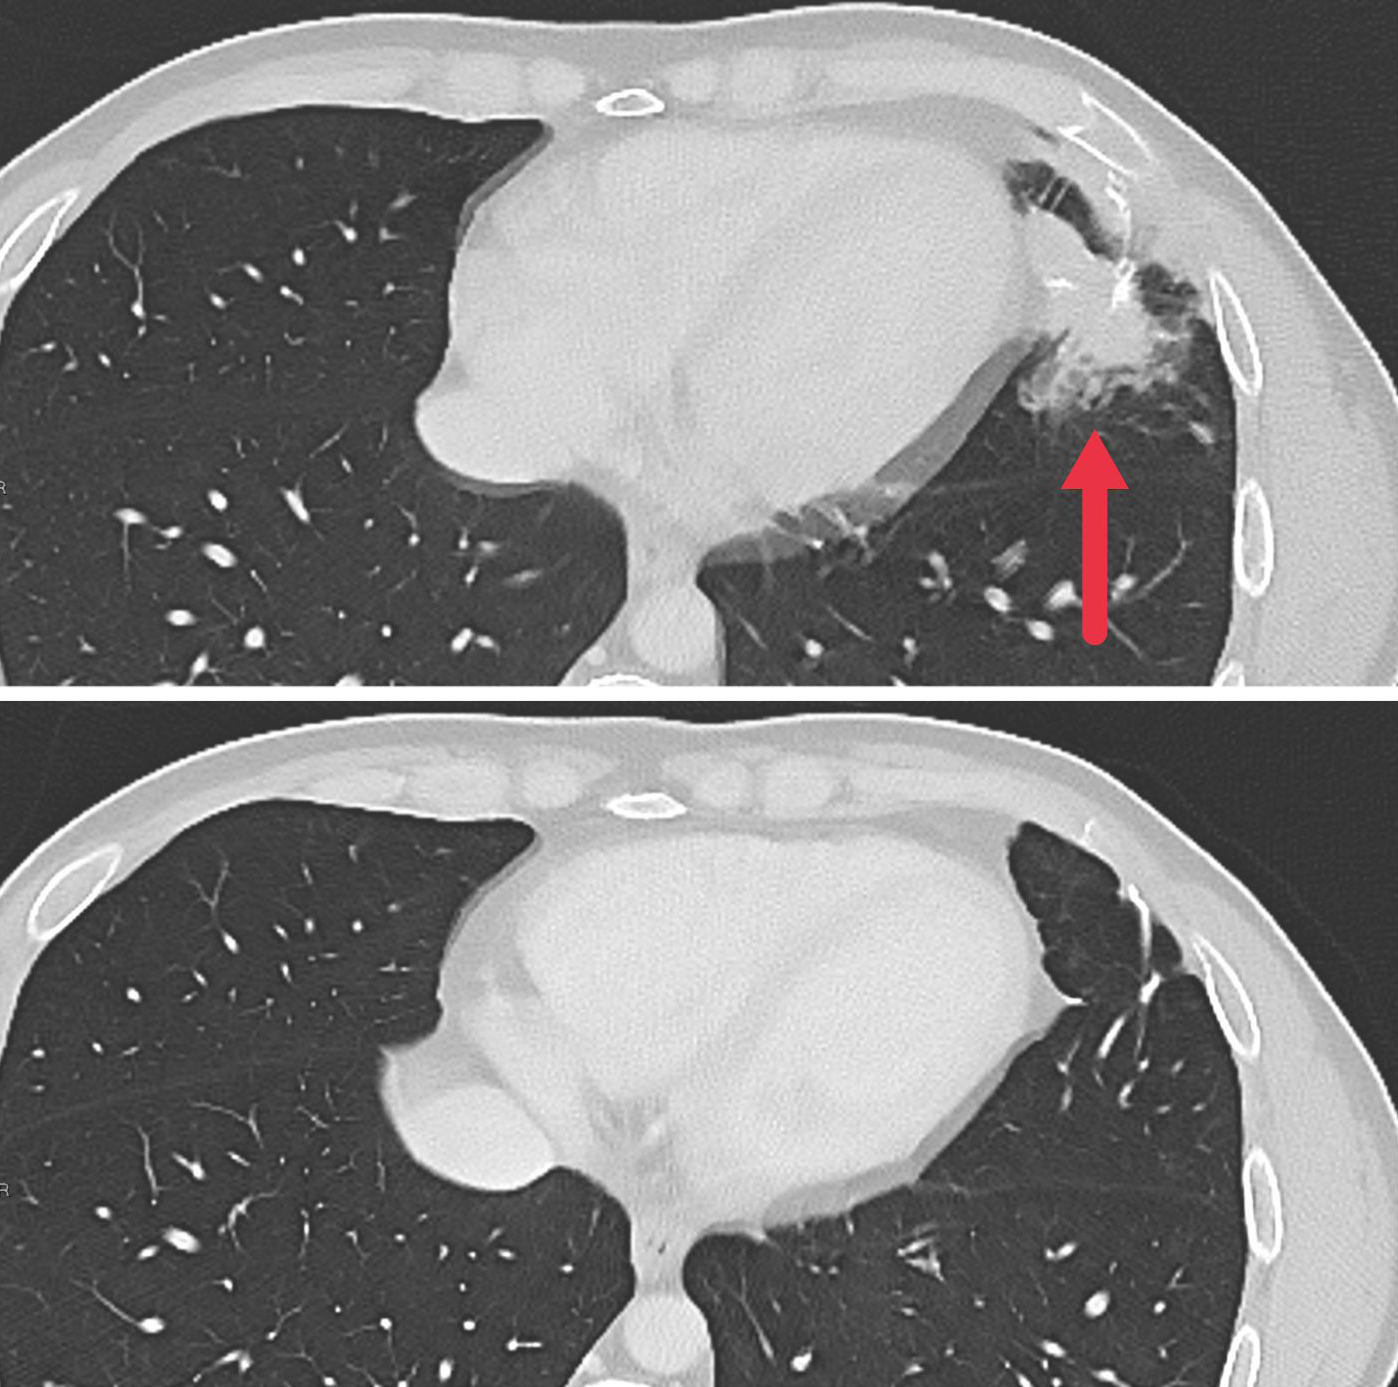 CT scan showing tumor before and after treatment.